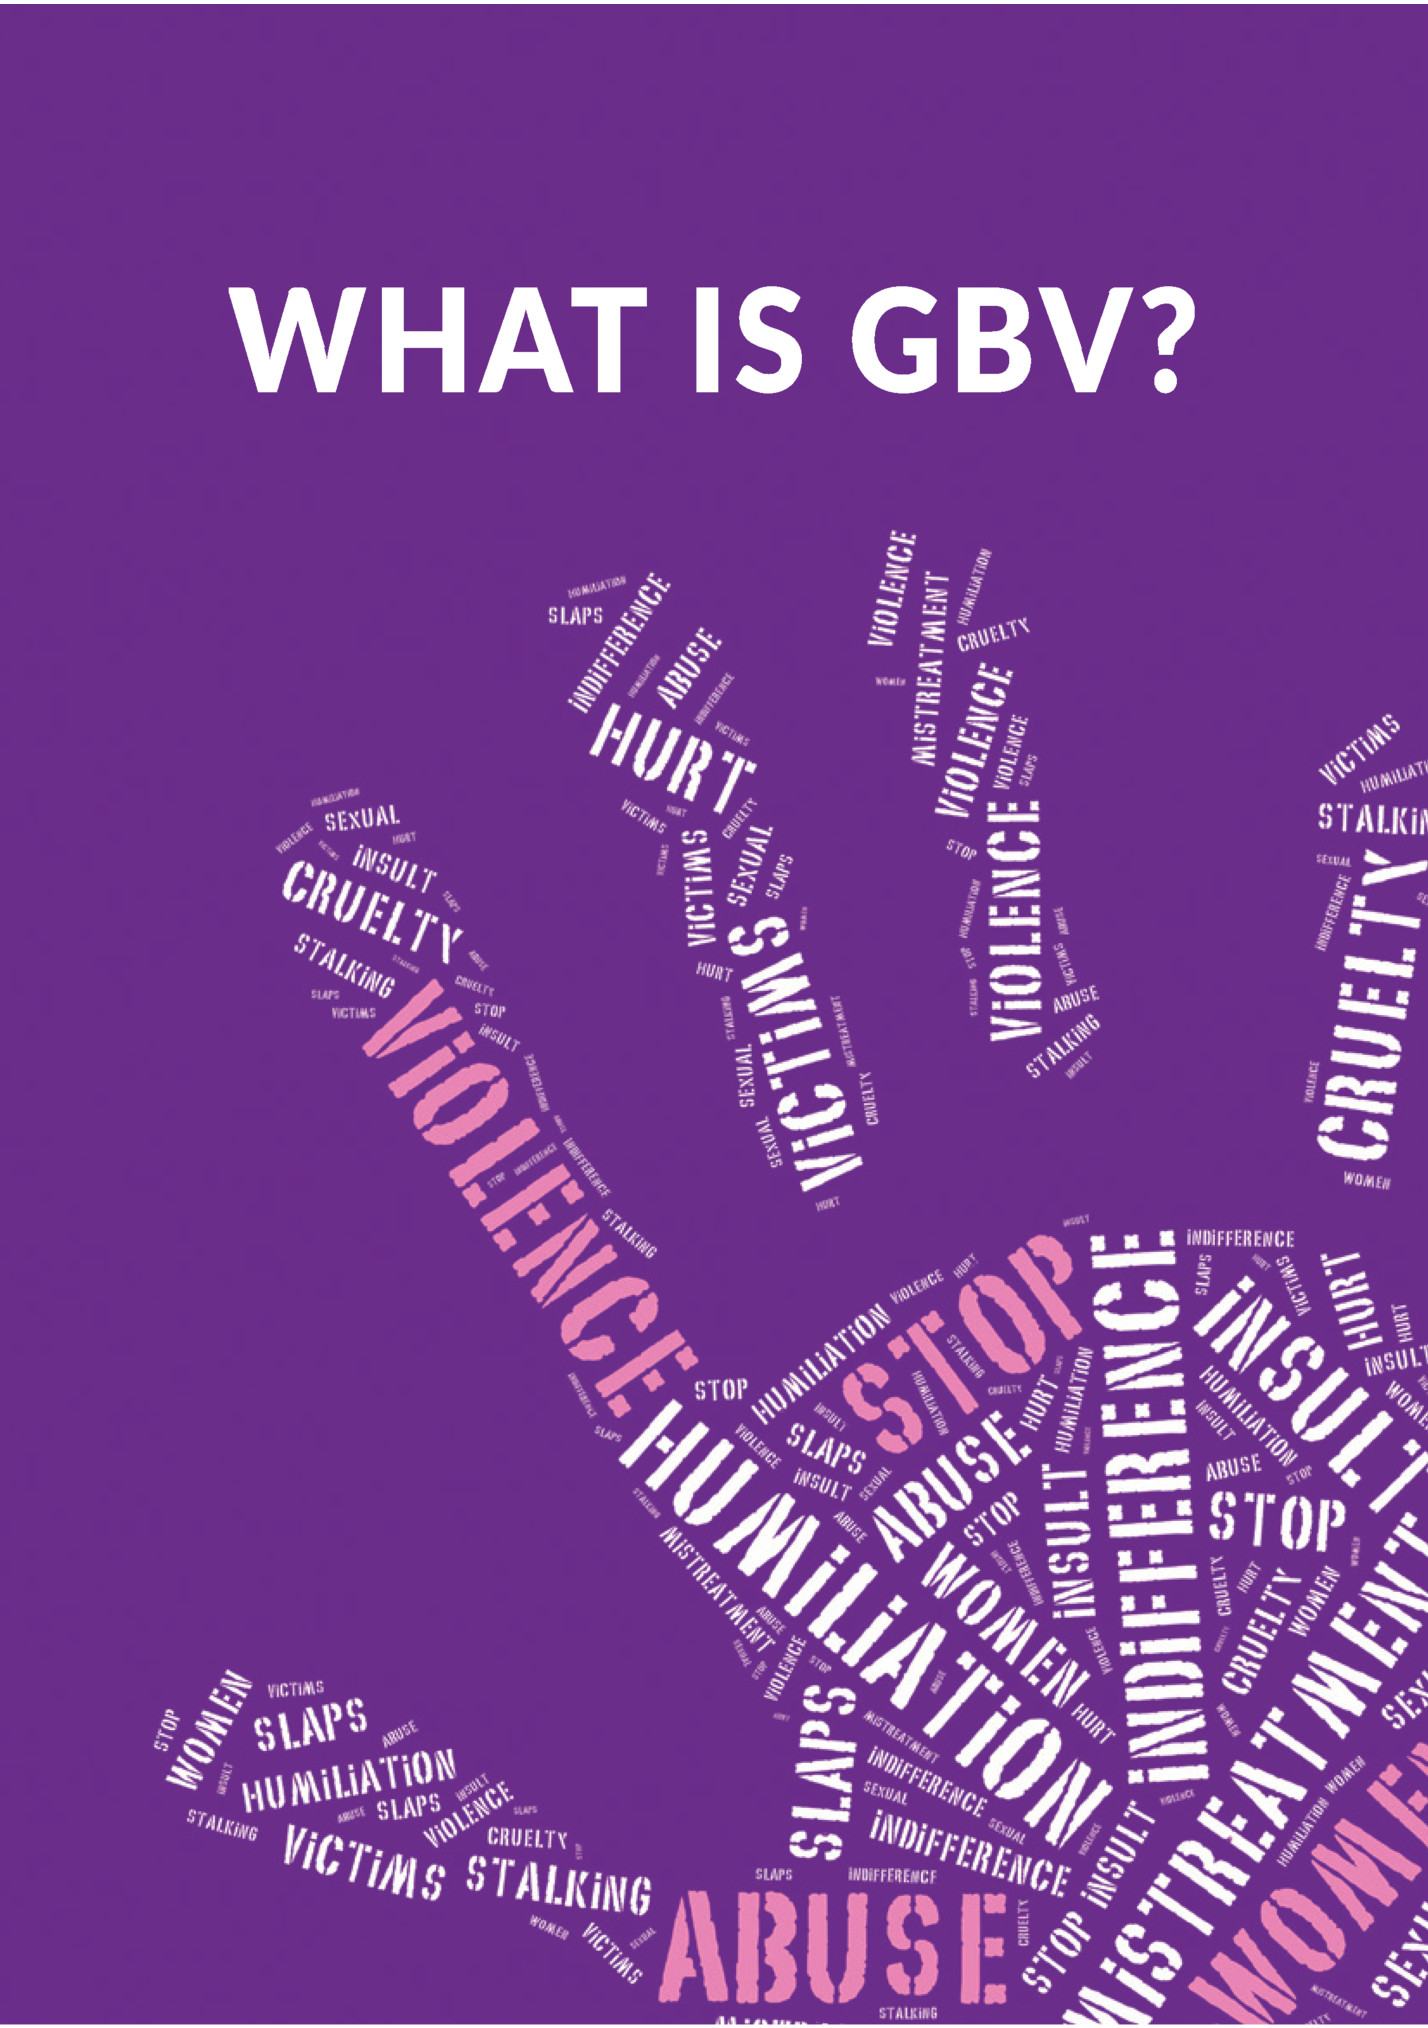 THE COSTLY IMPACT OF GBV